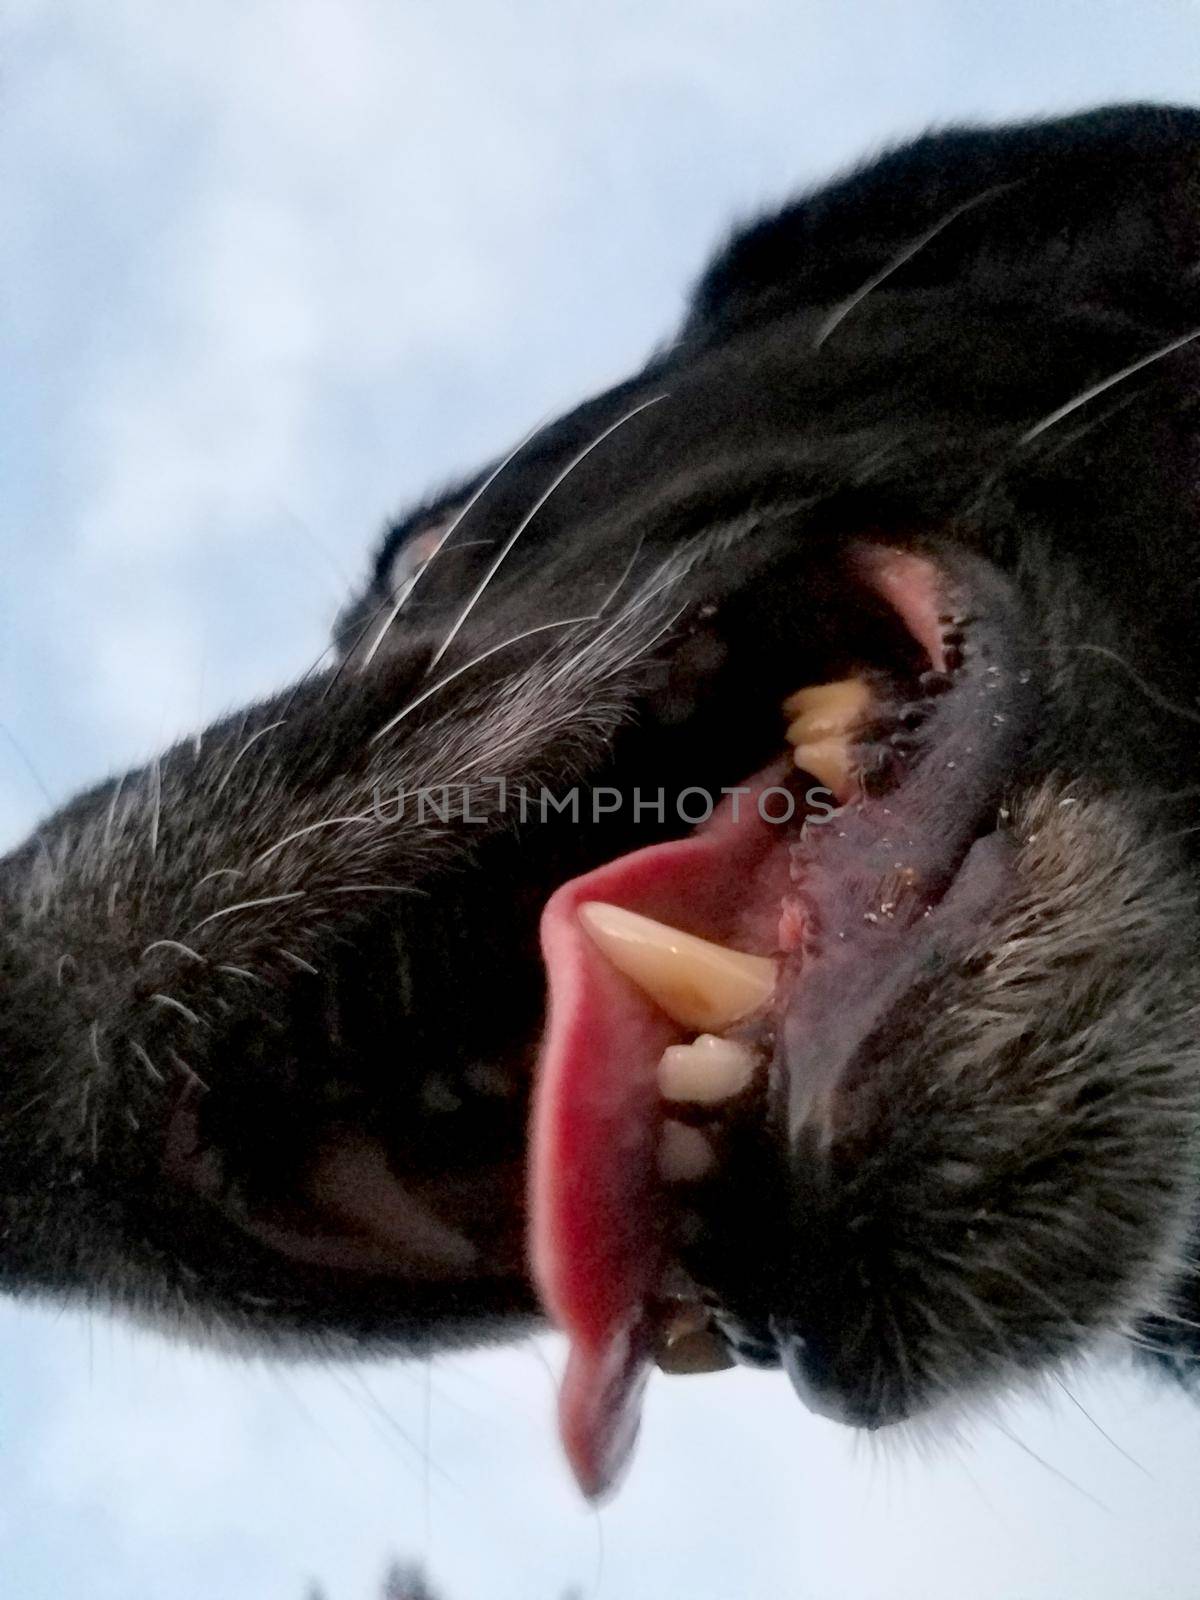 Black retriever Dog Dog Mouth Close-Up with tongue hanging out with sky above.